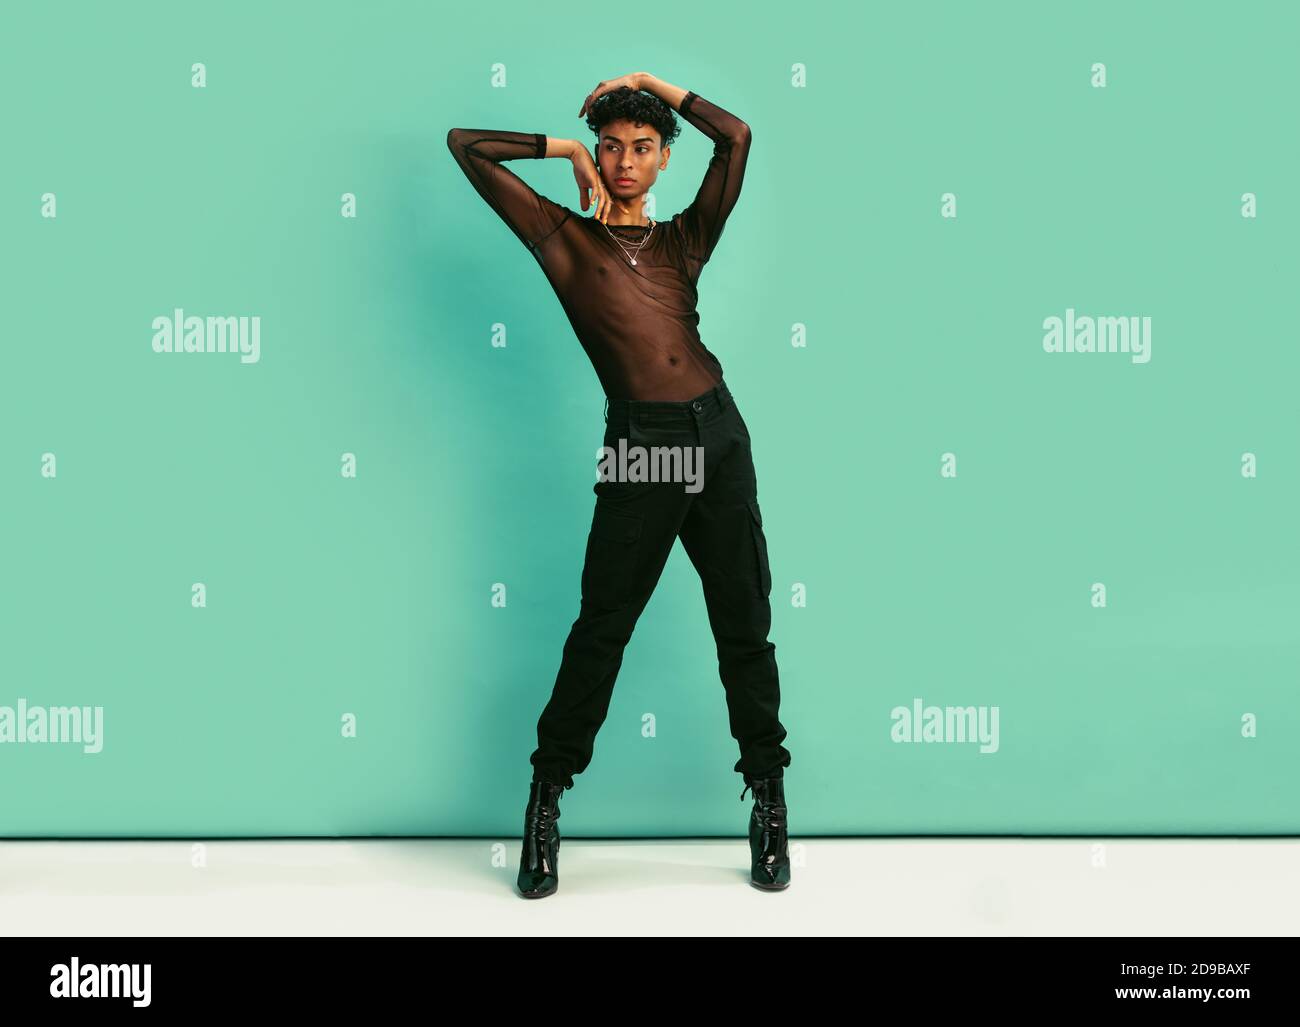 Full length of a gay man in black outfit. Gender fluid man wearing black jeans, black net shirt and high heels posing against blue background. Stock Photo